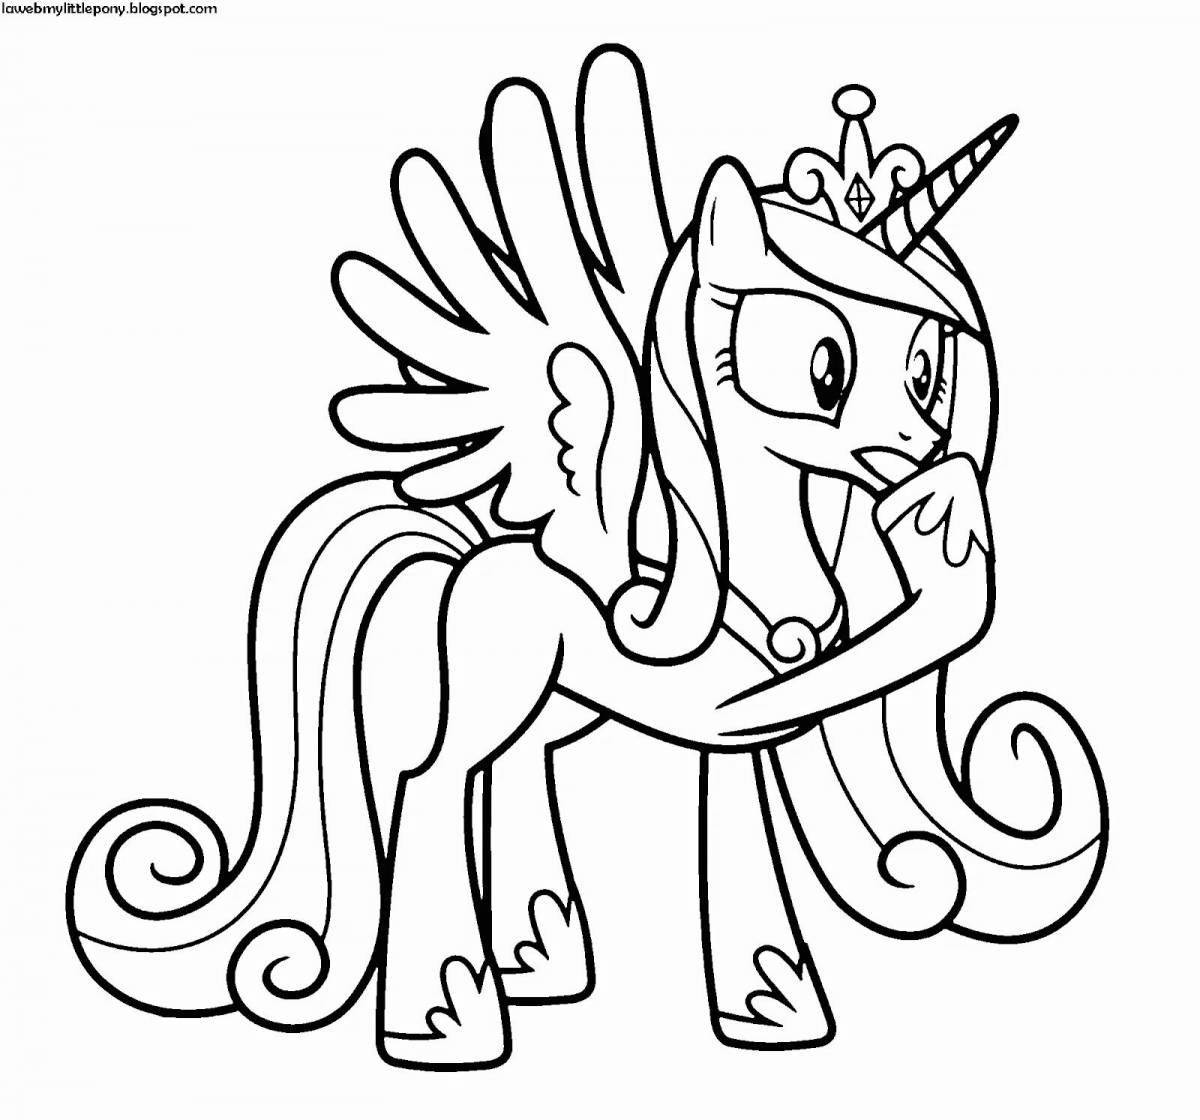 My little pony cadence glowing coloring book